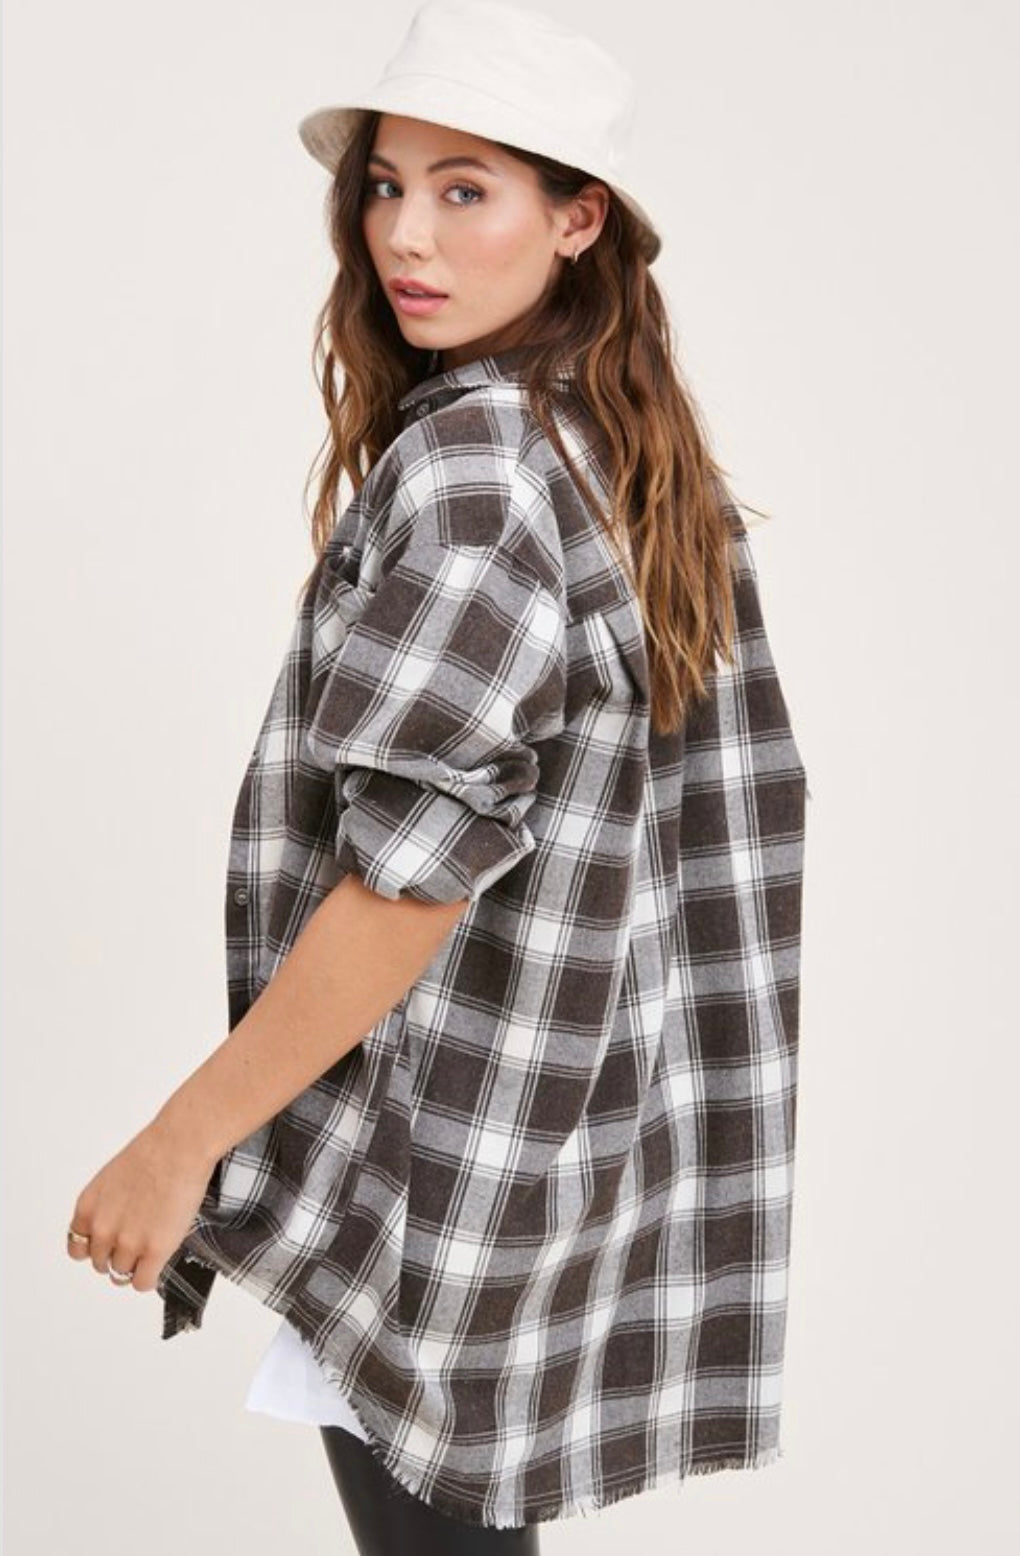 Kianna Plaid Vintage Shirt - Corinne Boutique Family Owned and Operated USA